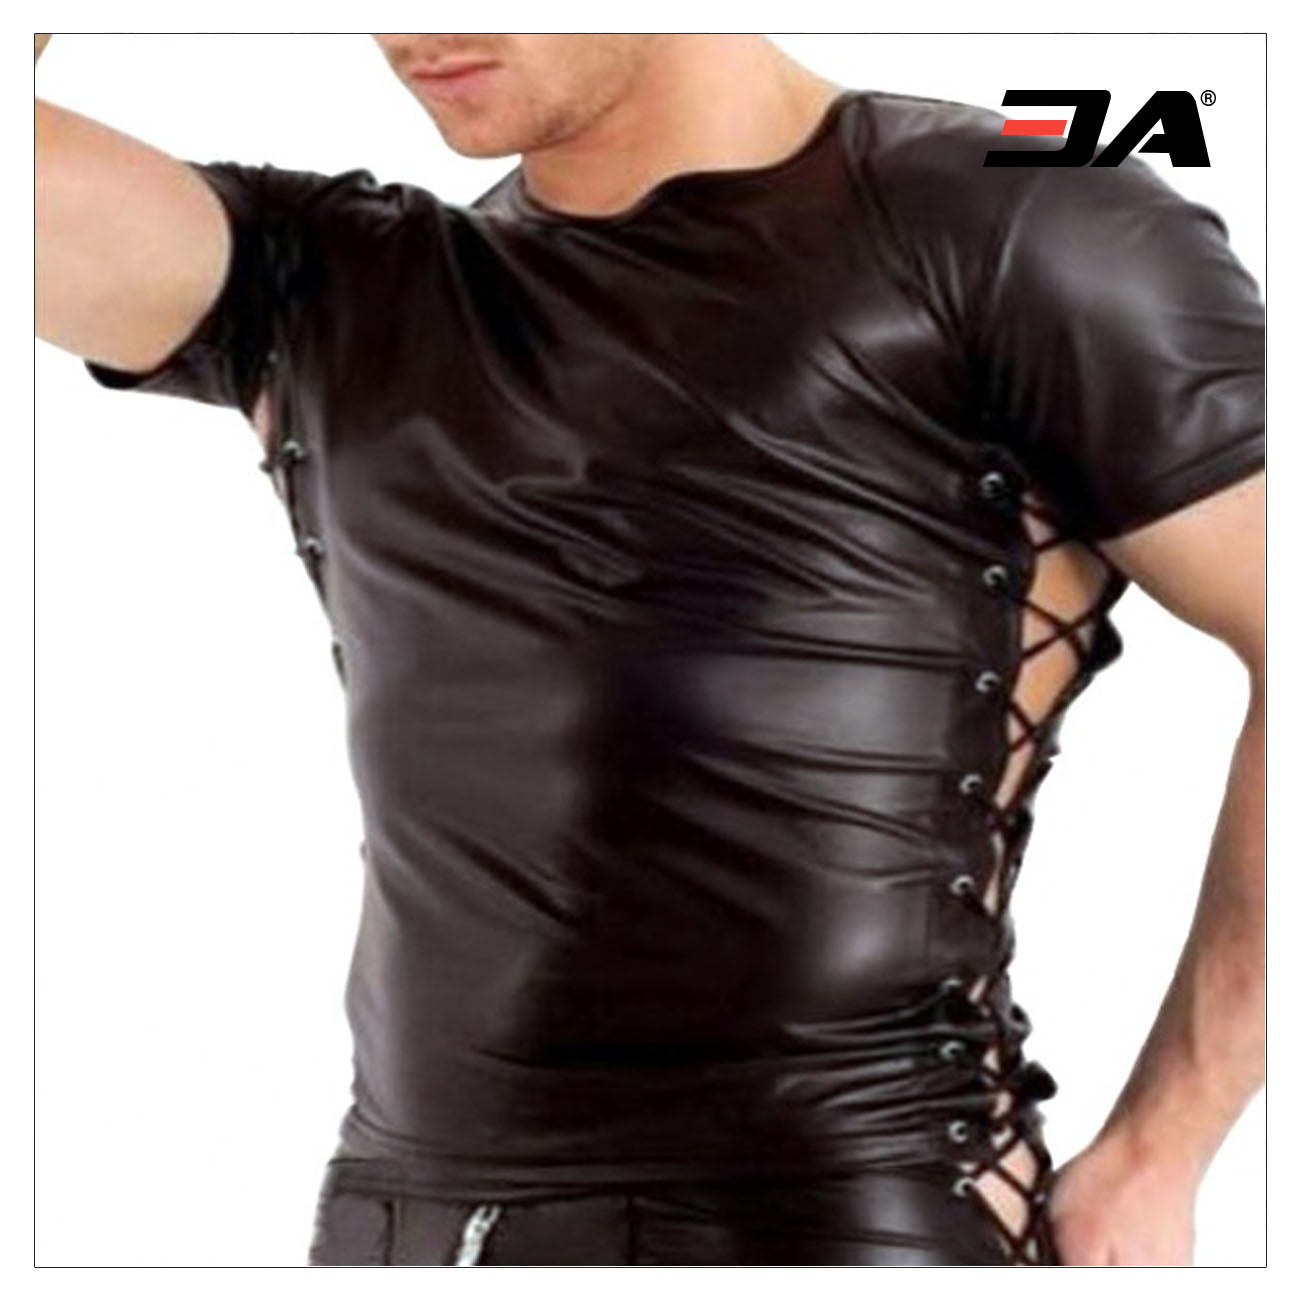 Tight Leather Shirt for sale